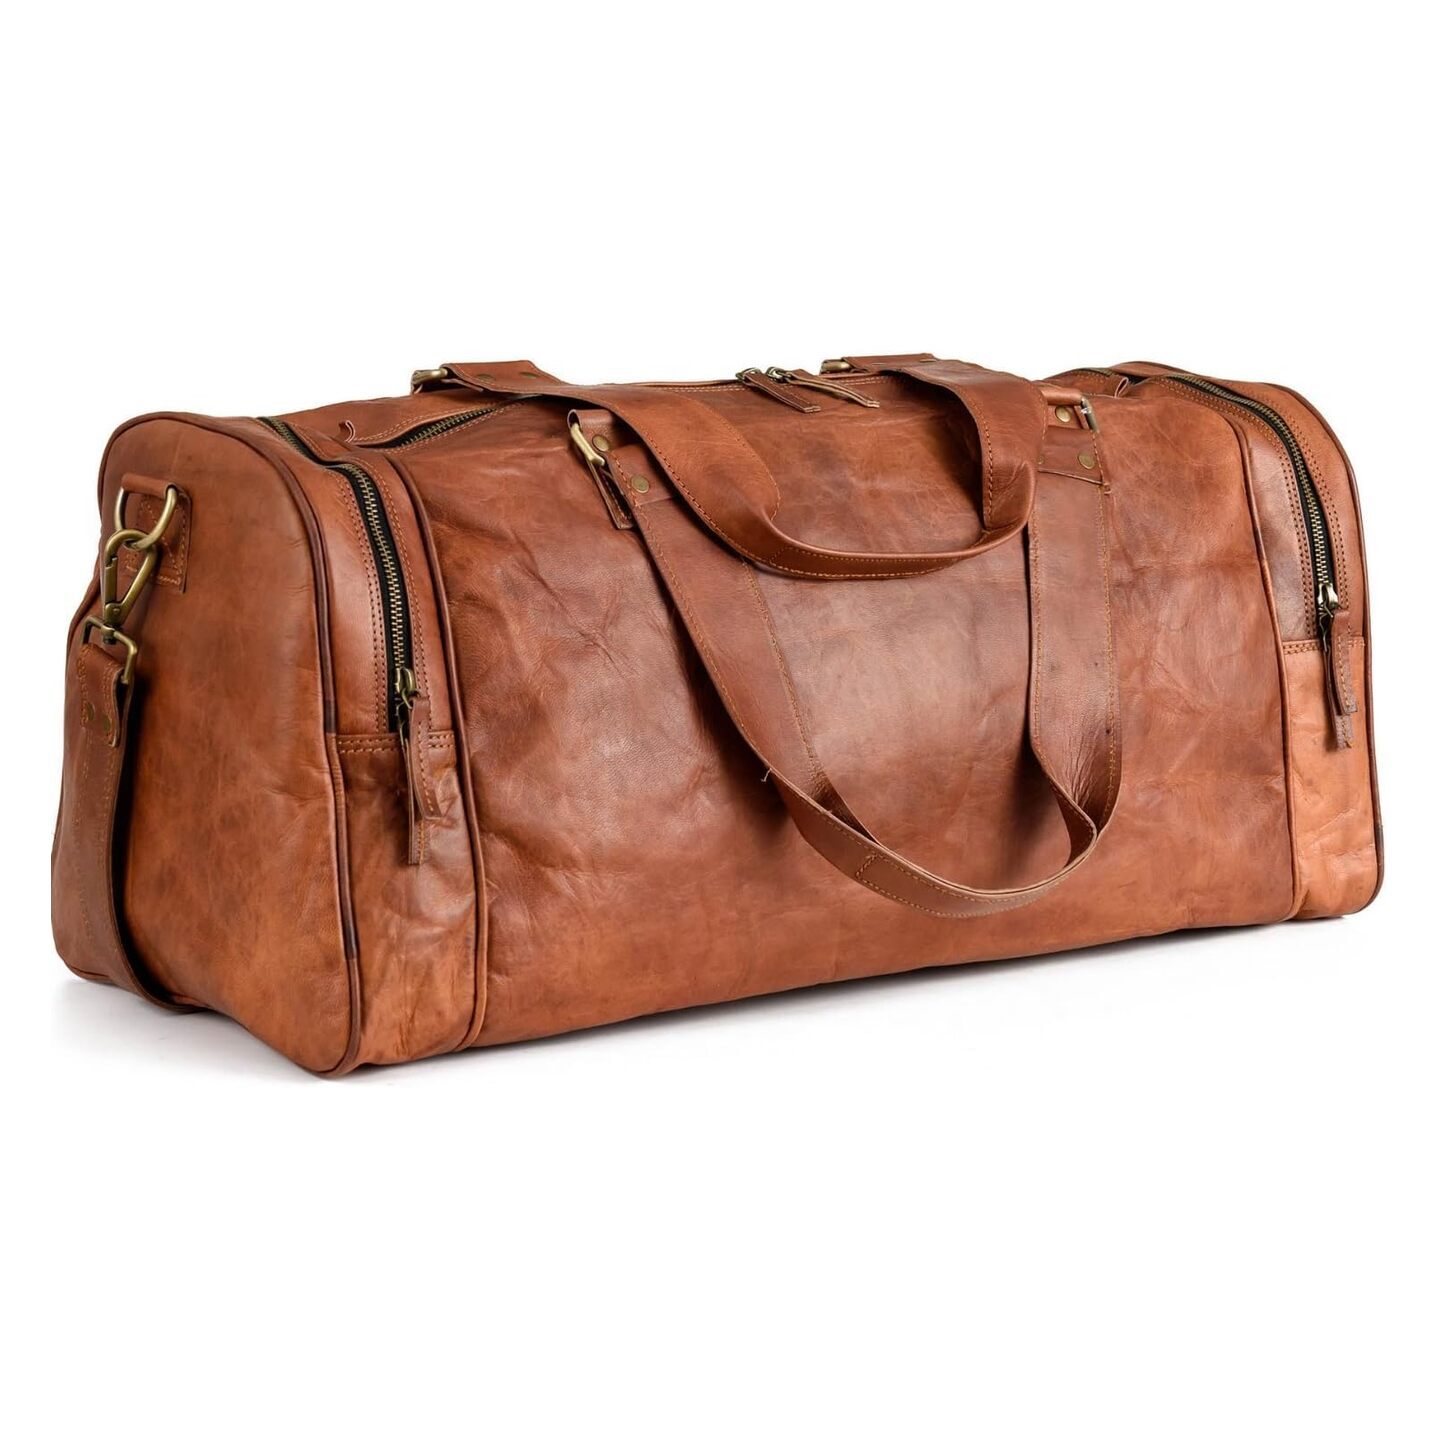 Vintage Leather Duffle Bag Bergen for Travel or the Gym, Overnight Bag for Men and Women - Brown (Cognac)